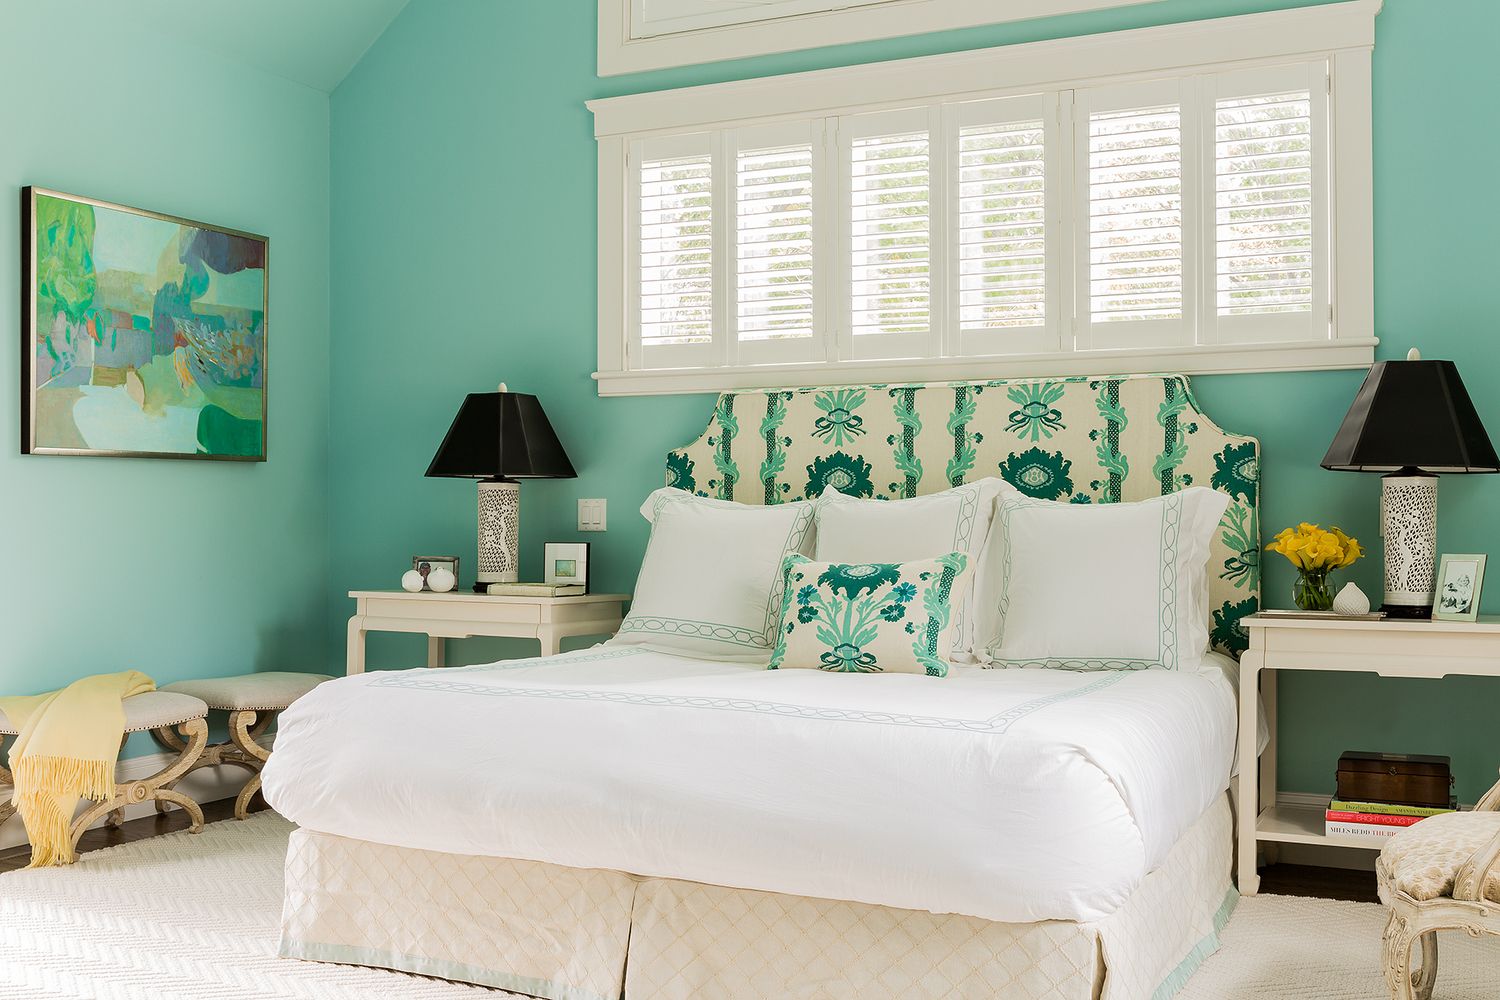 40 Vibrant Room Color Ideas - How to Decorate With Bright Colors